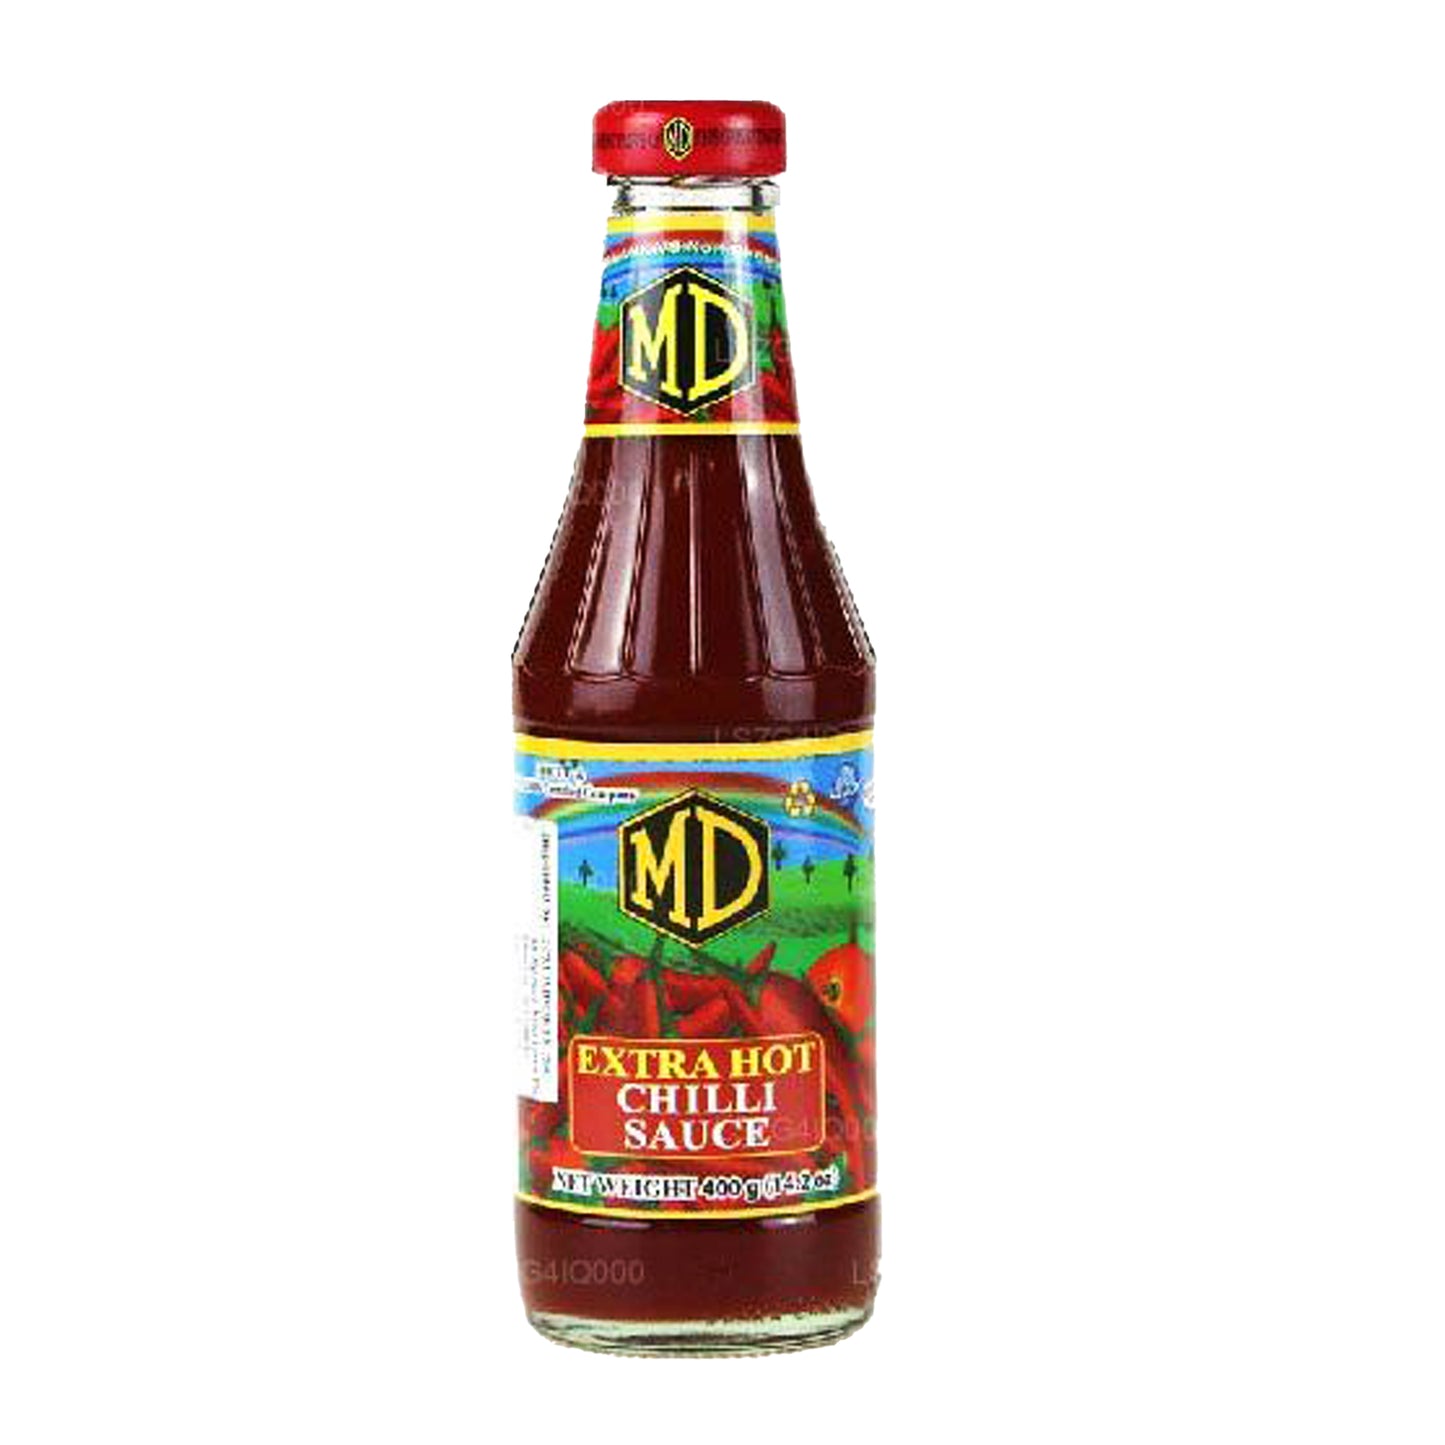 MD Extra Hot Chili Sauce (400g)